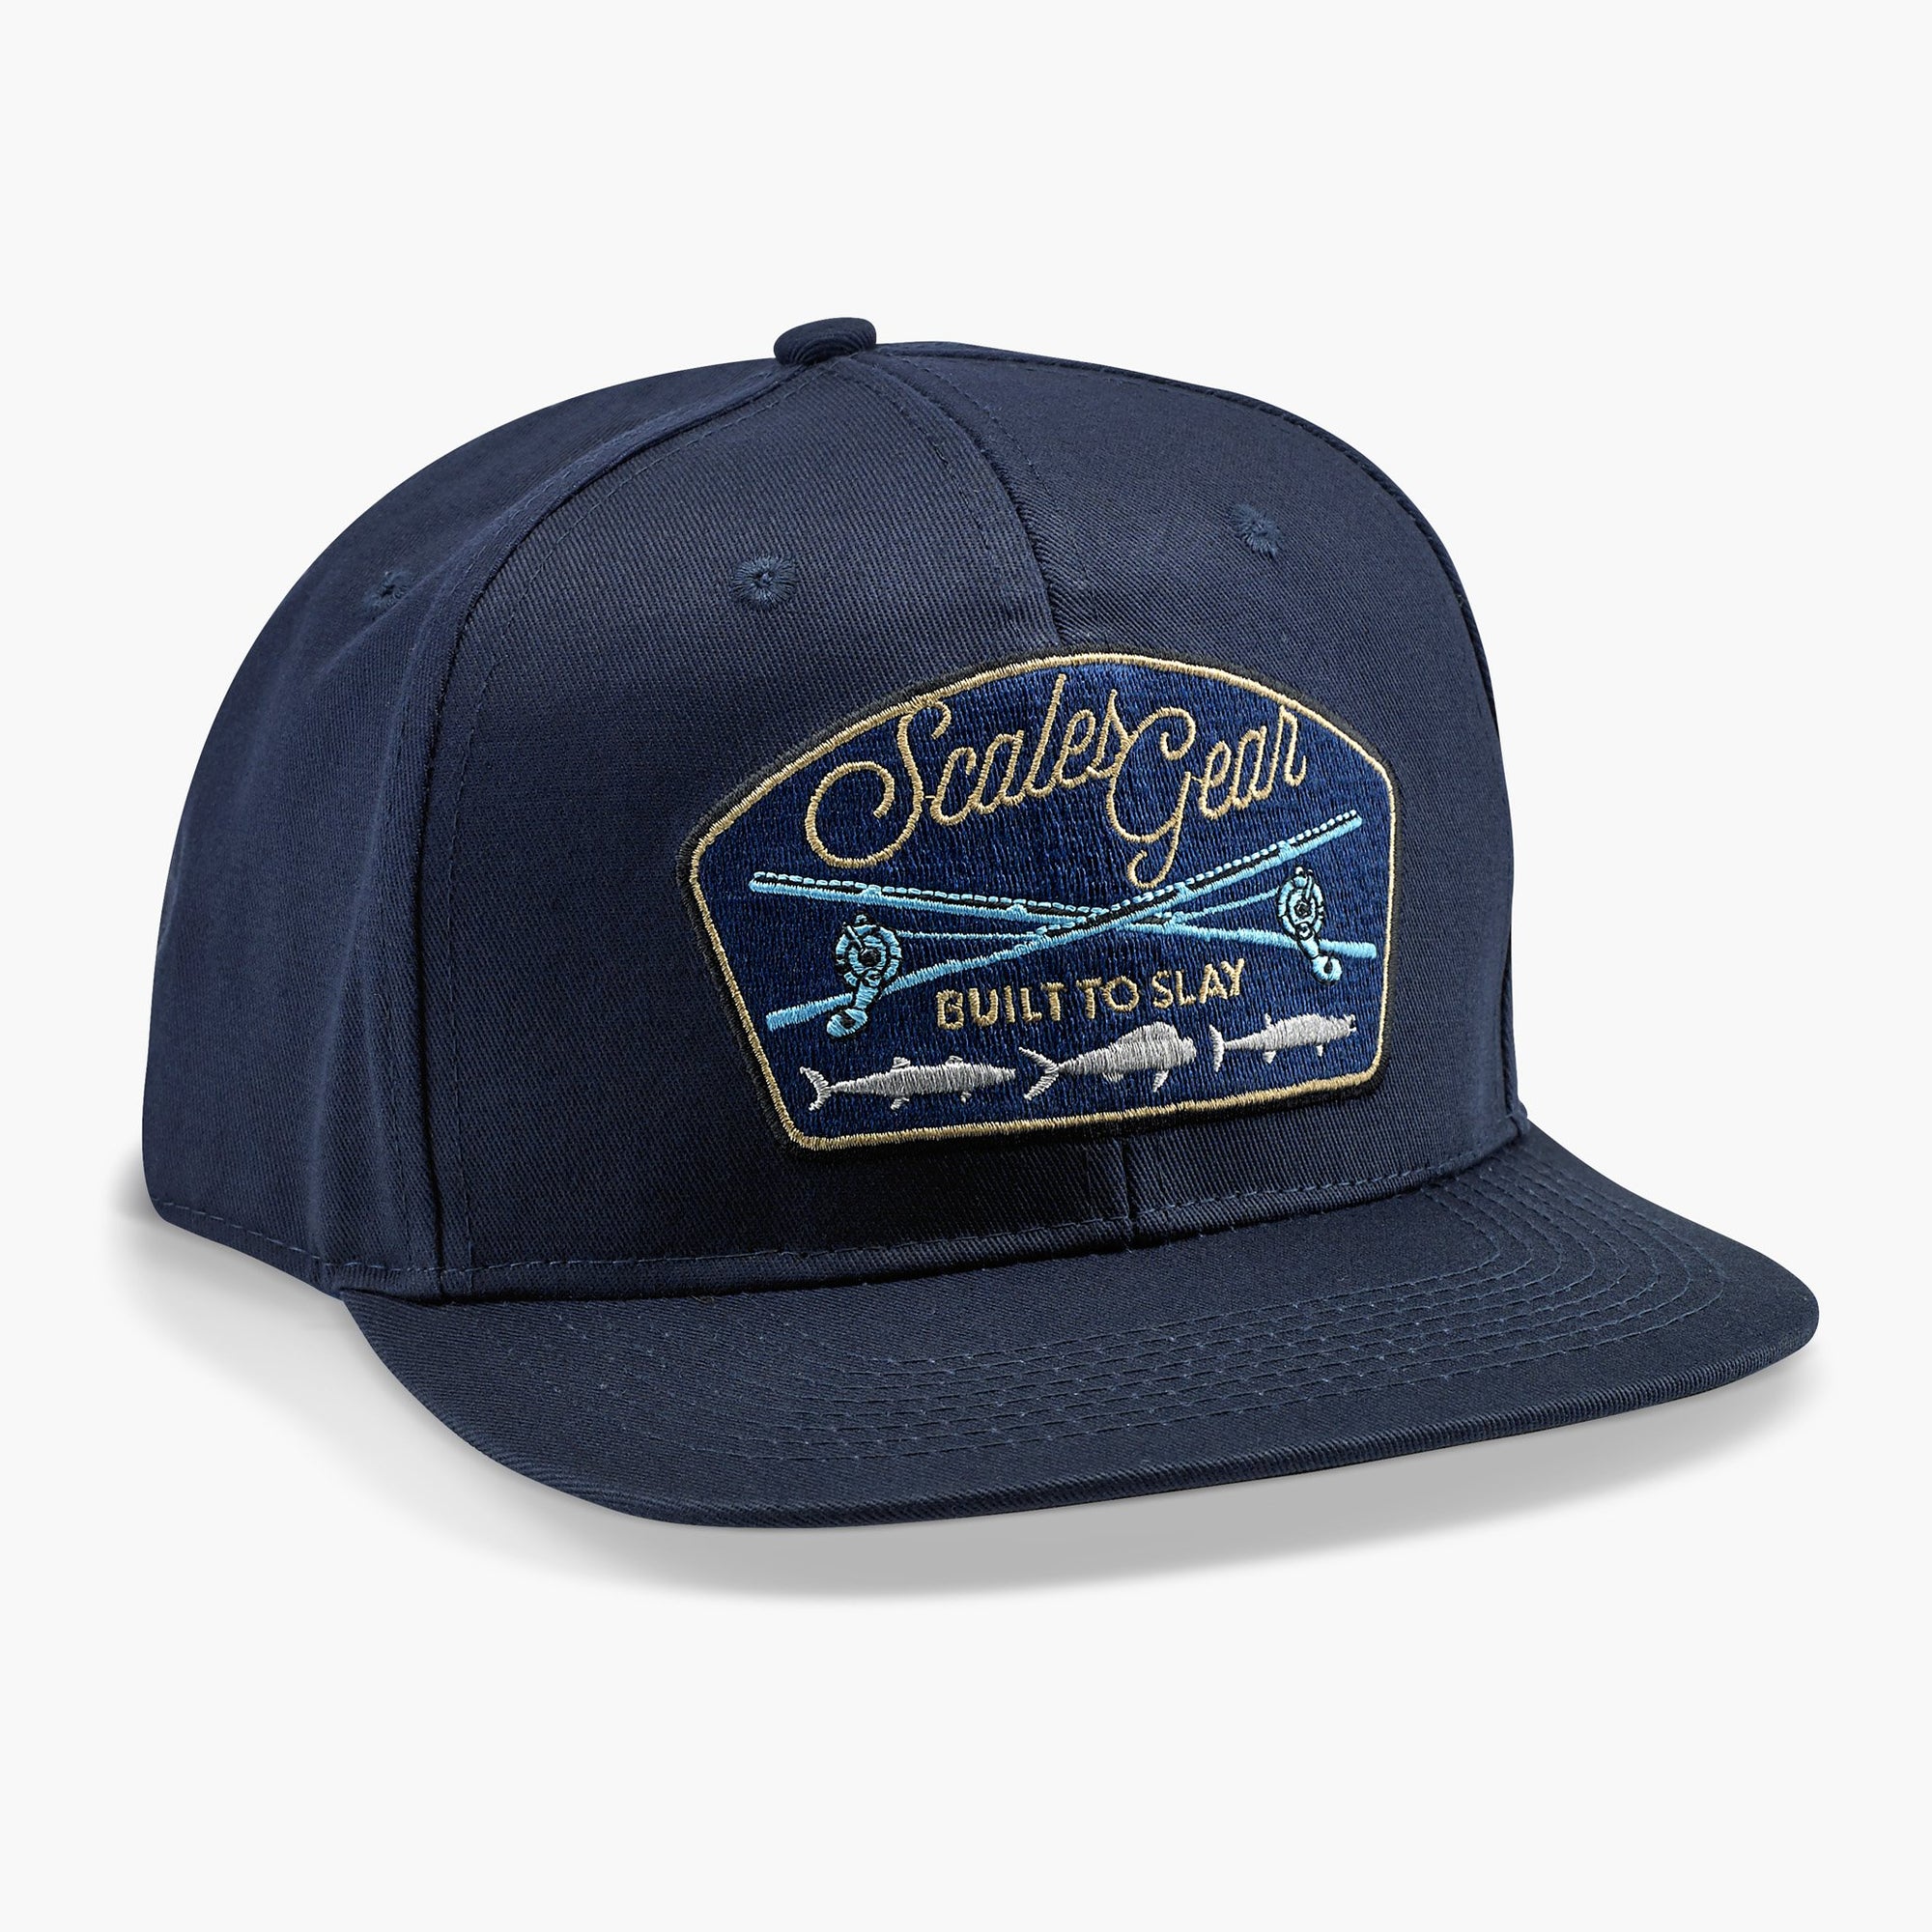 Scales Gear In the Meat Snapback Navy Cap